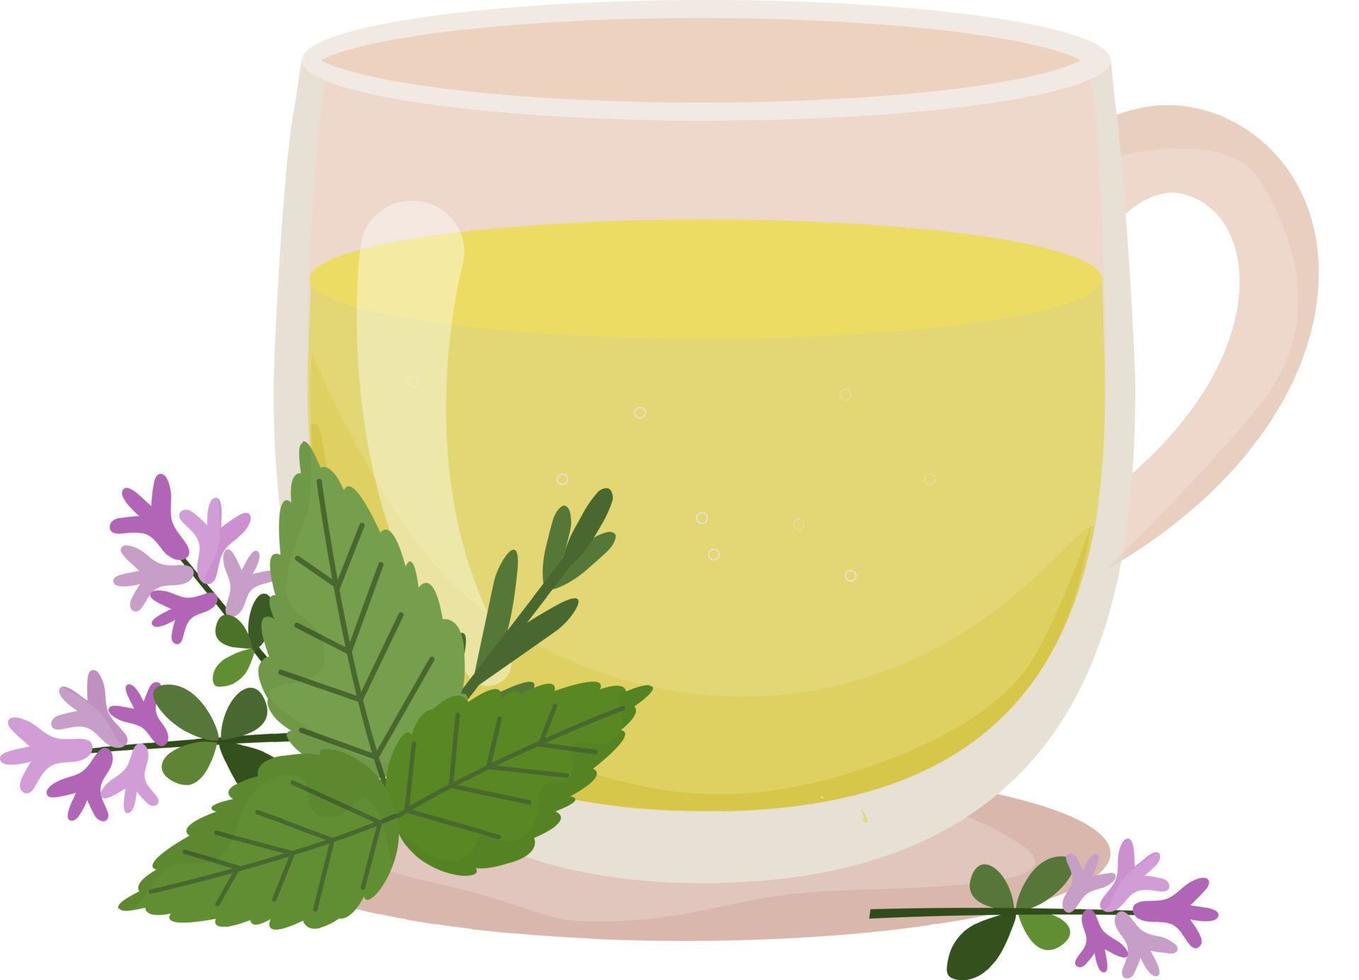 Herbal tea. Cup of tea with thyme and mint. Transparent cup with tea and floral decoration. Hot drink. Healthcare. Homeopathic treatment. Vector illustration on white background.